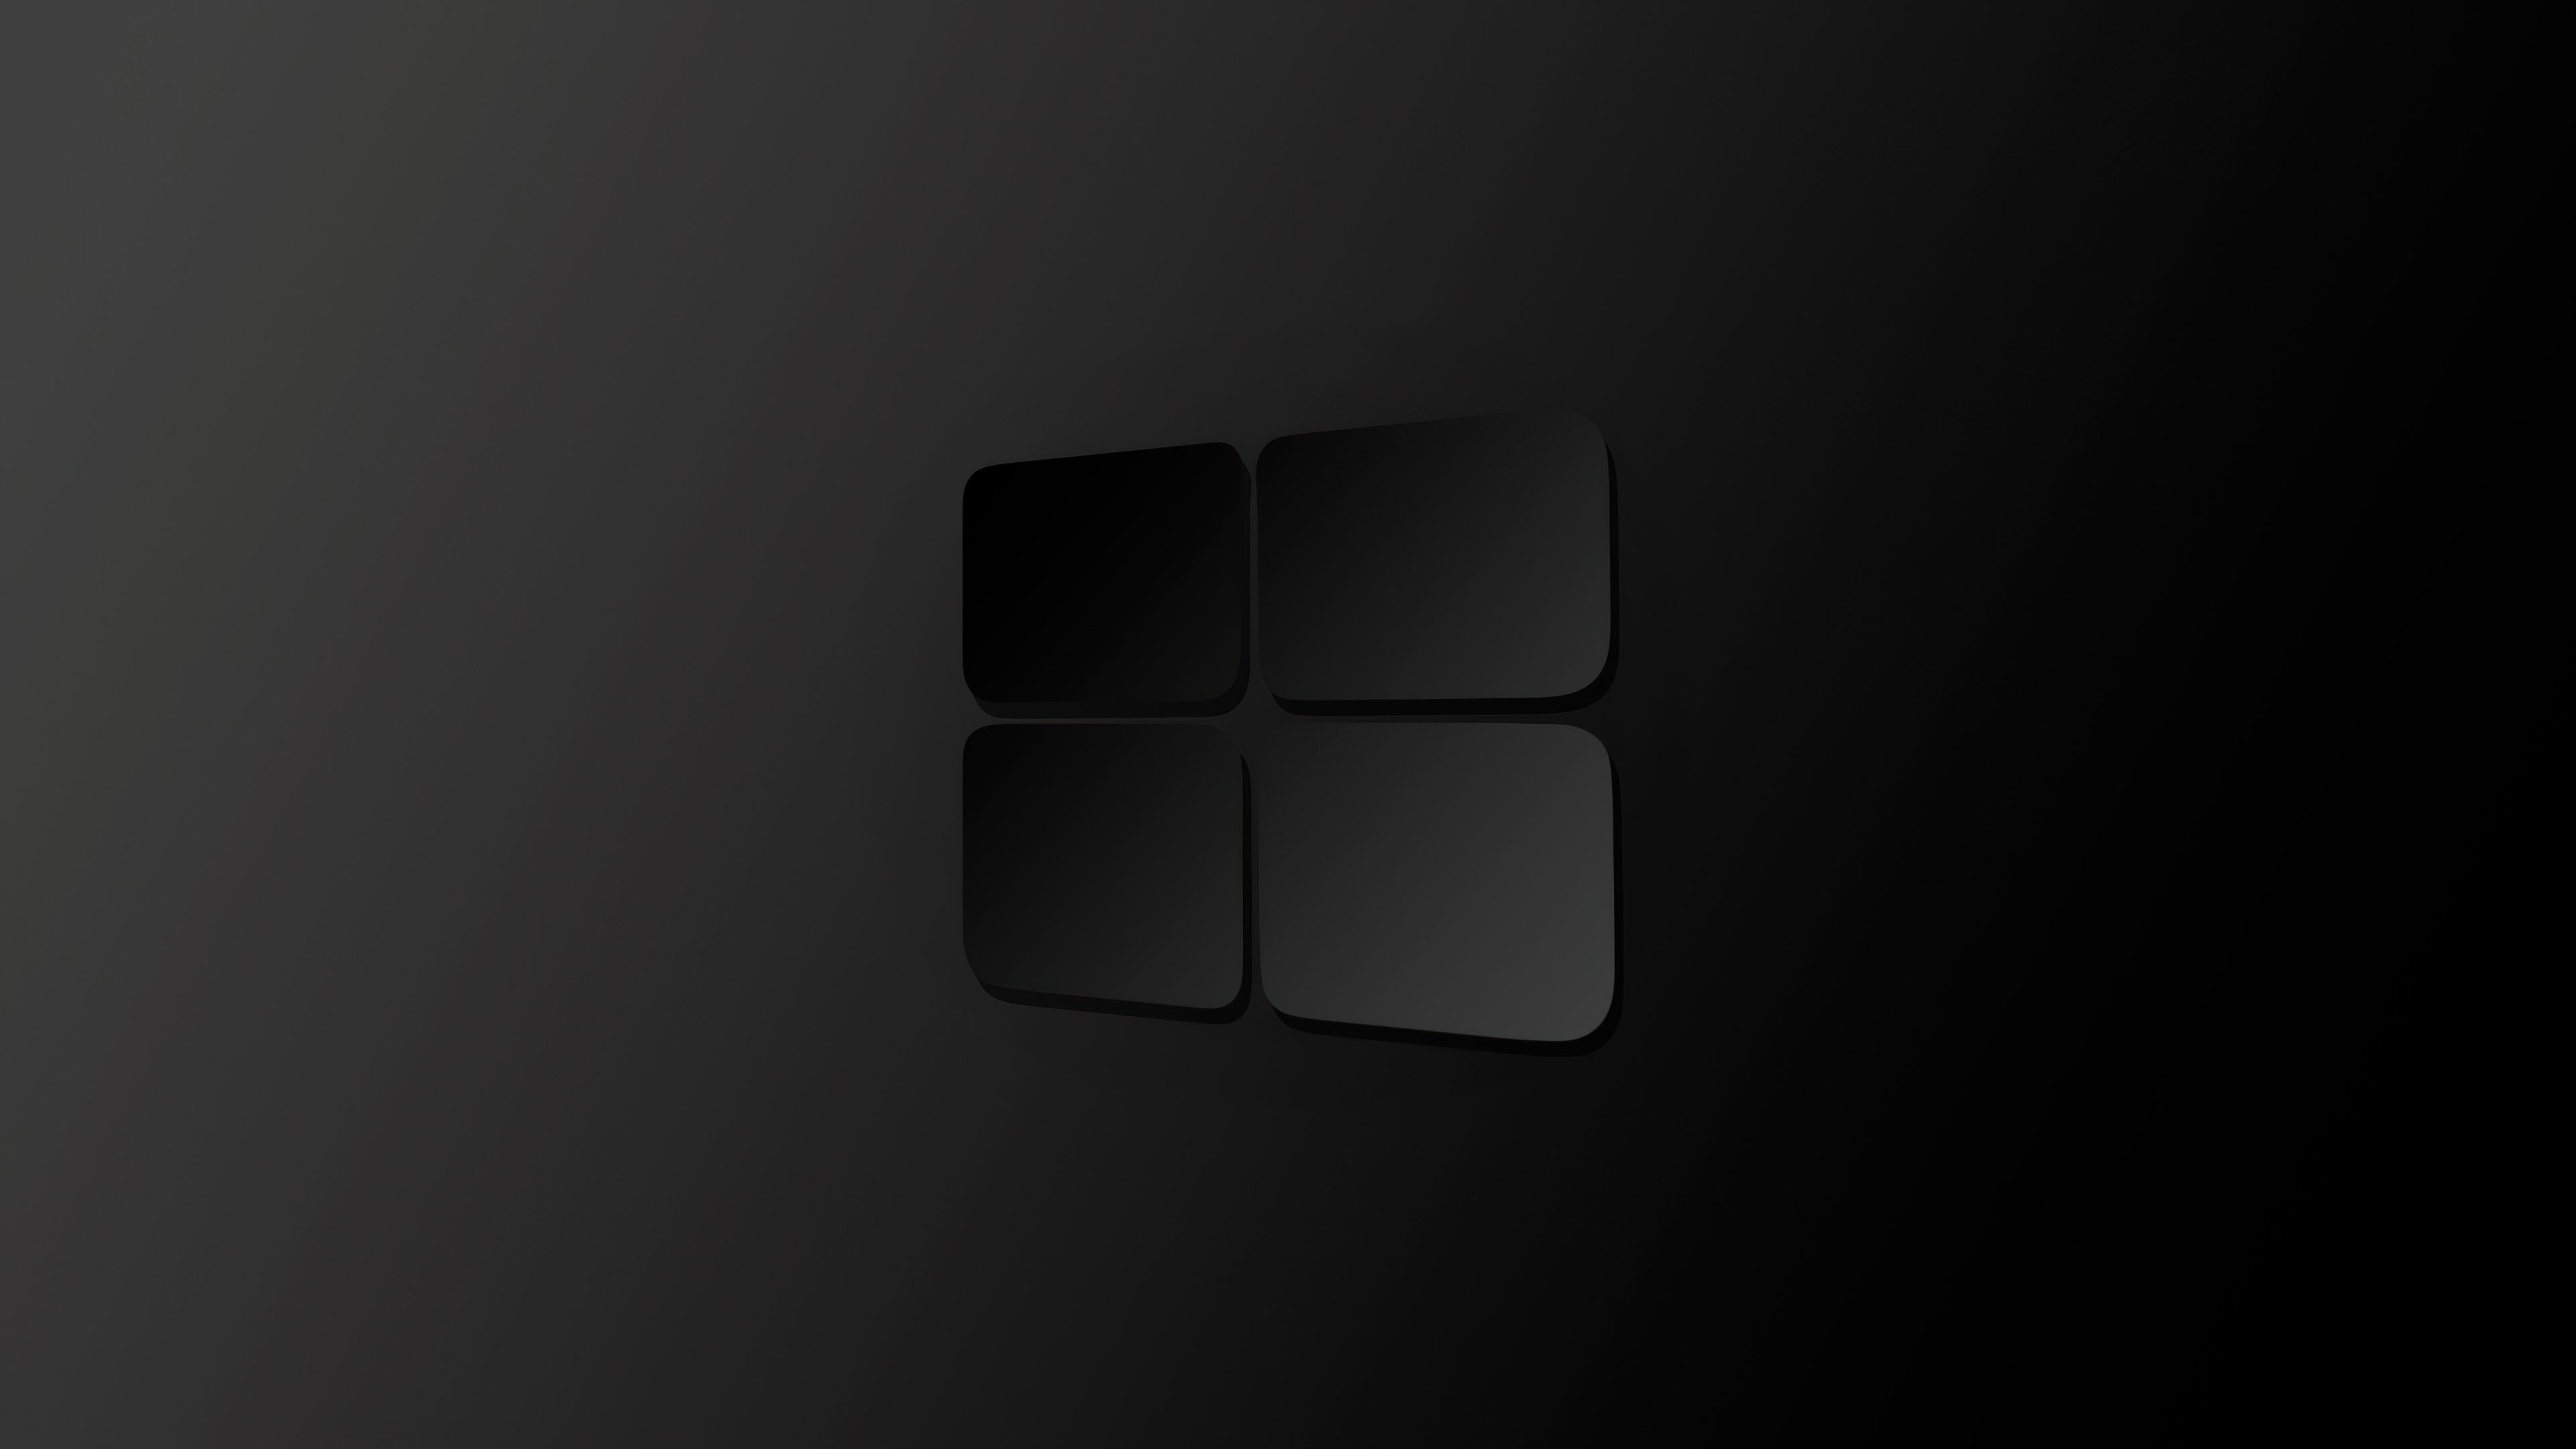 Windows 10 Darkness Logo 4k, HD Computer, 4k Wallpaper, Image, Background, Photo and Picture